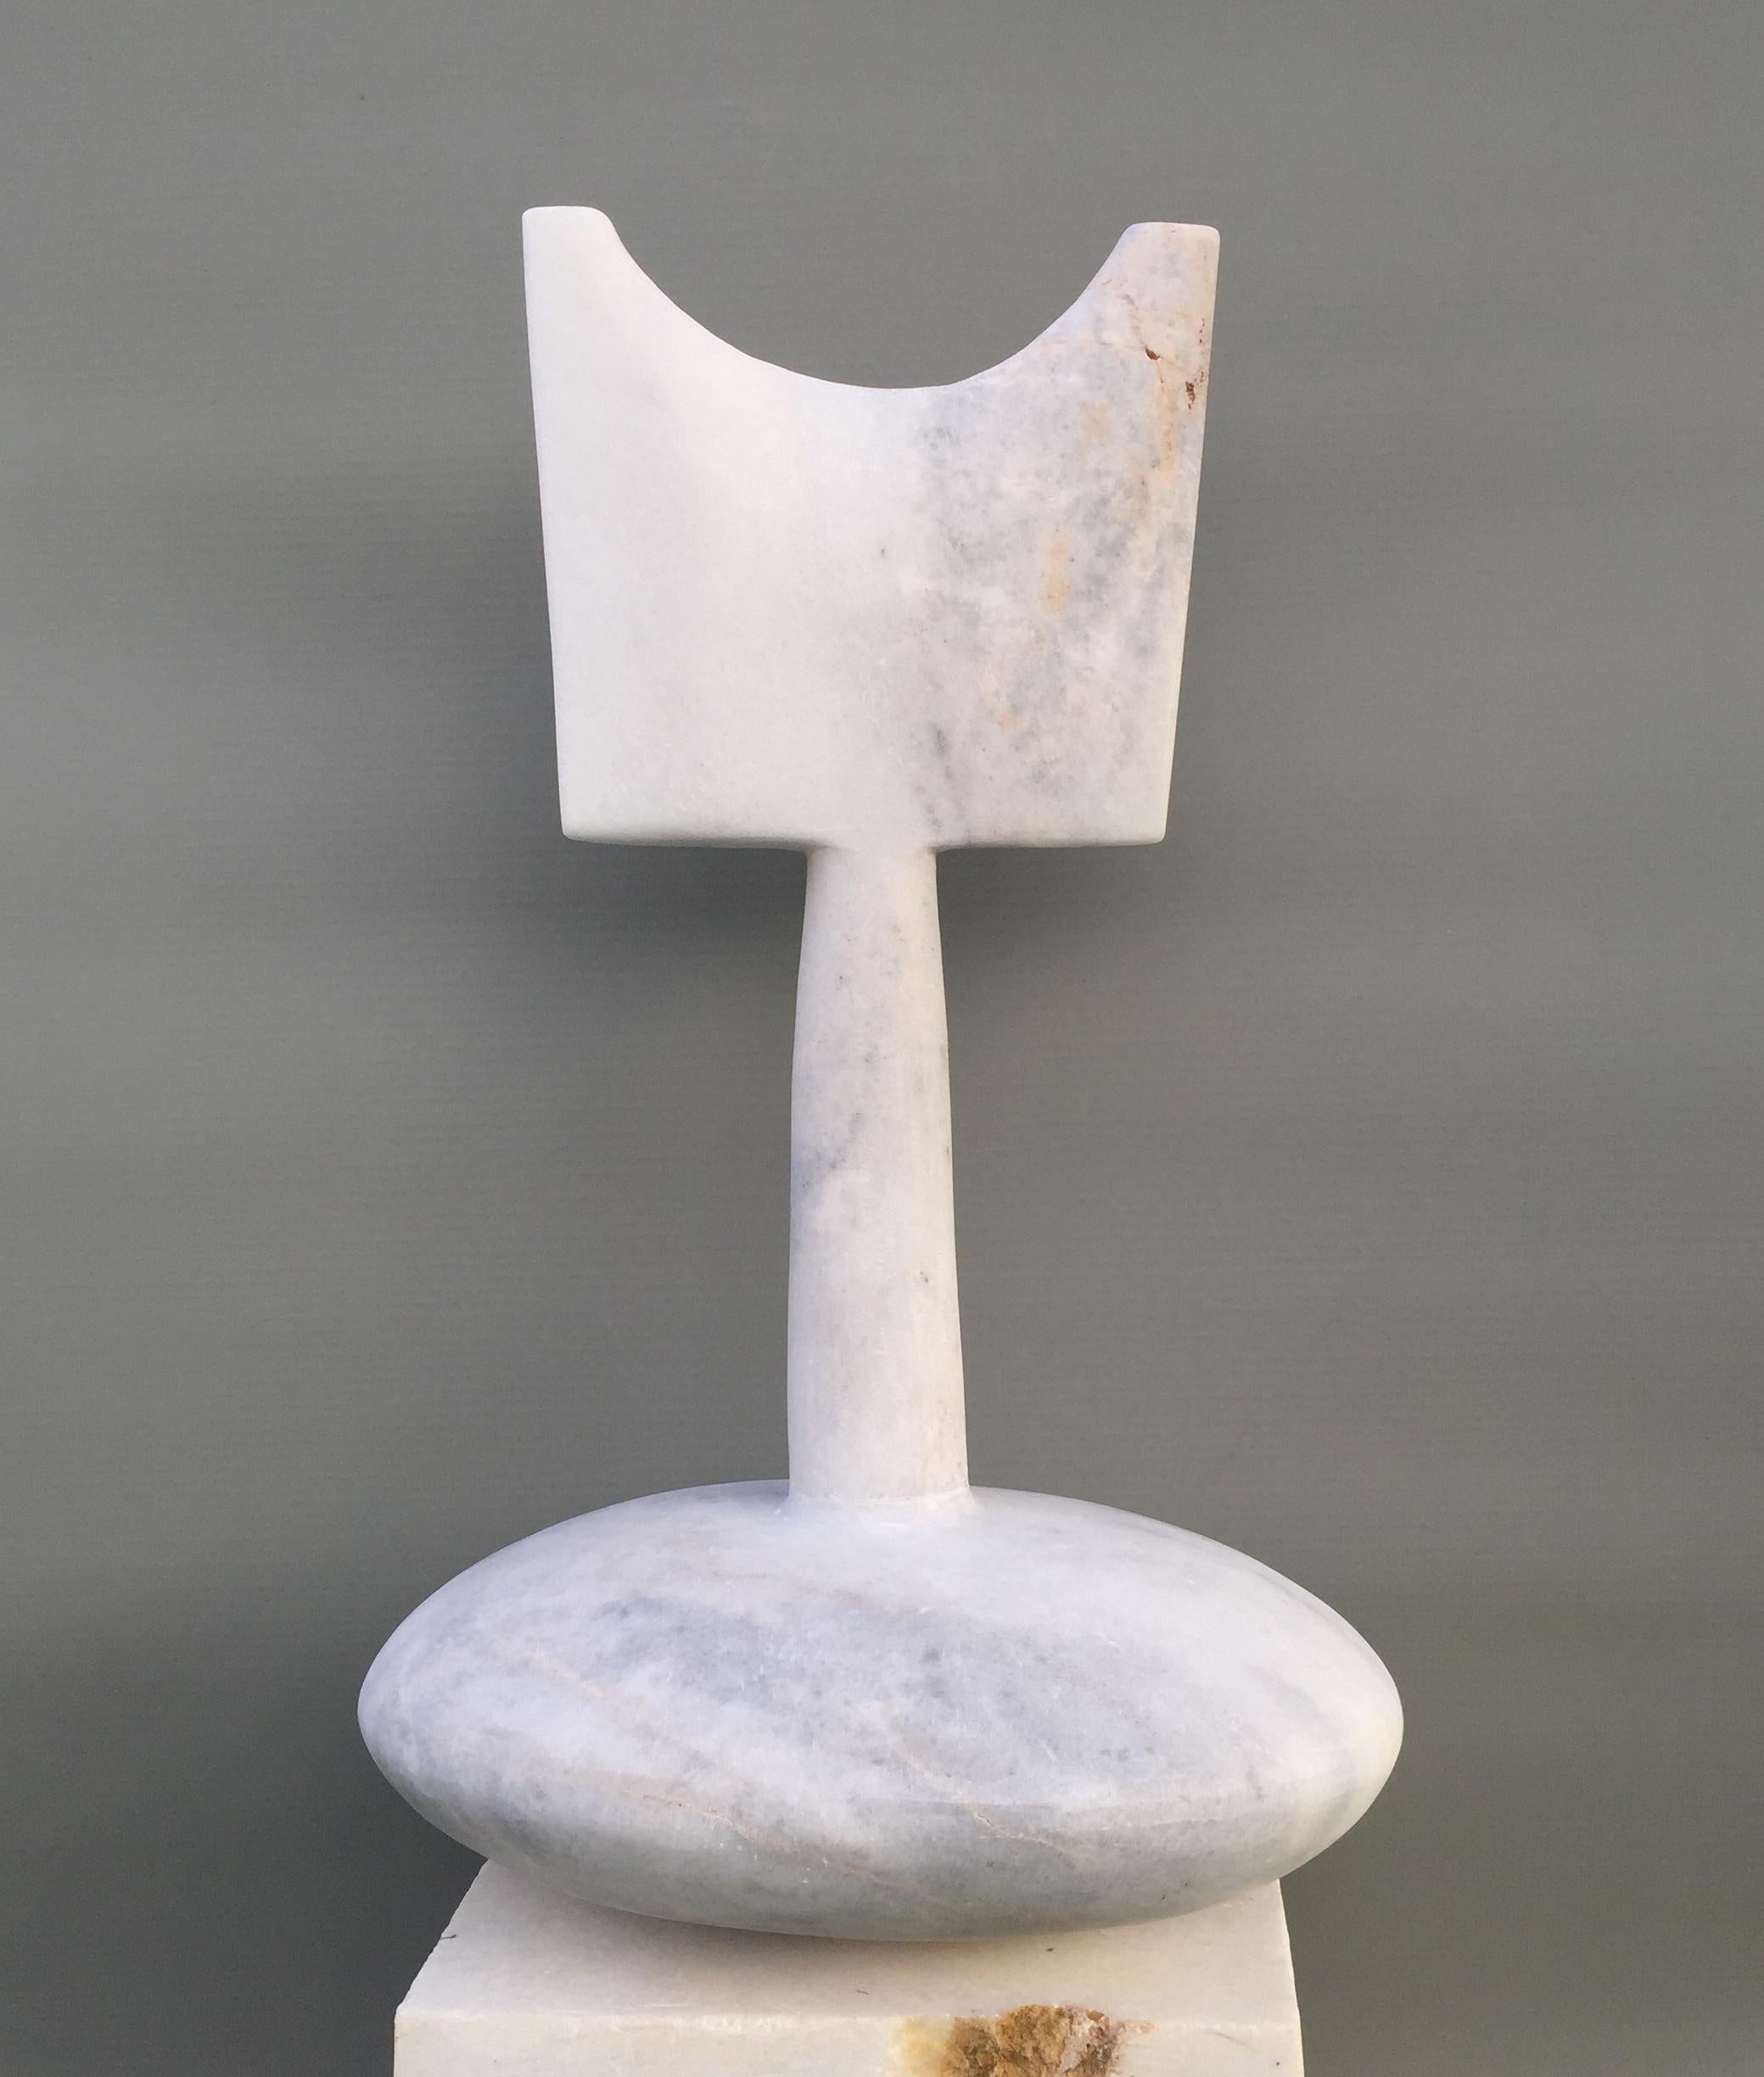 Untitled, marble sculpture by Tom von Kaenel
Dimensions: D 33 x W 43 x H 72 cm
Unique artwork signed by Tom von Kaenel

All the artworks of Tom von Kaenel are unique, handcrafted by himself.
The stones all come from the surrounding marble